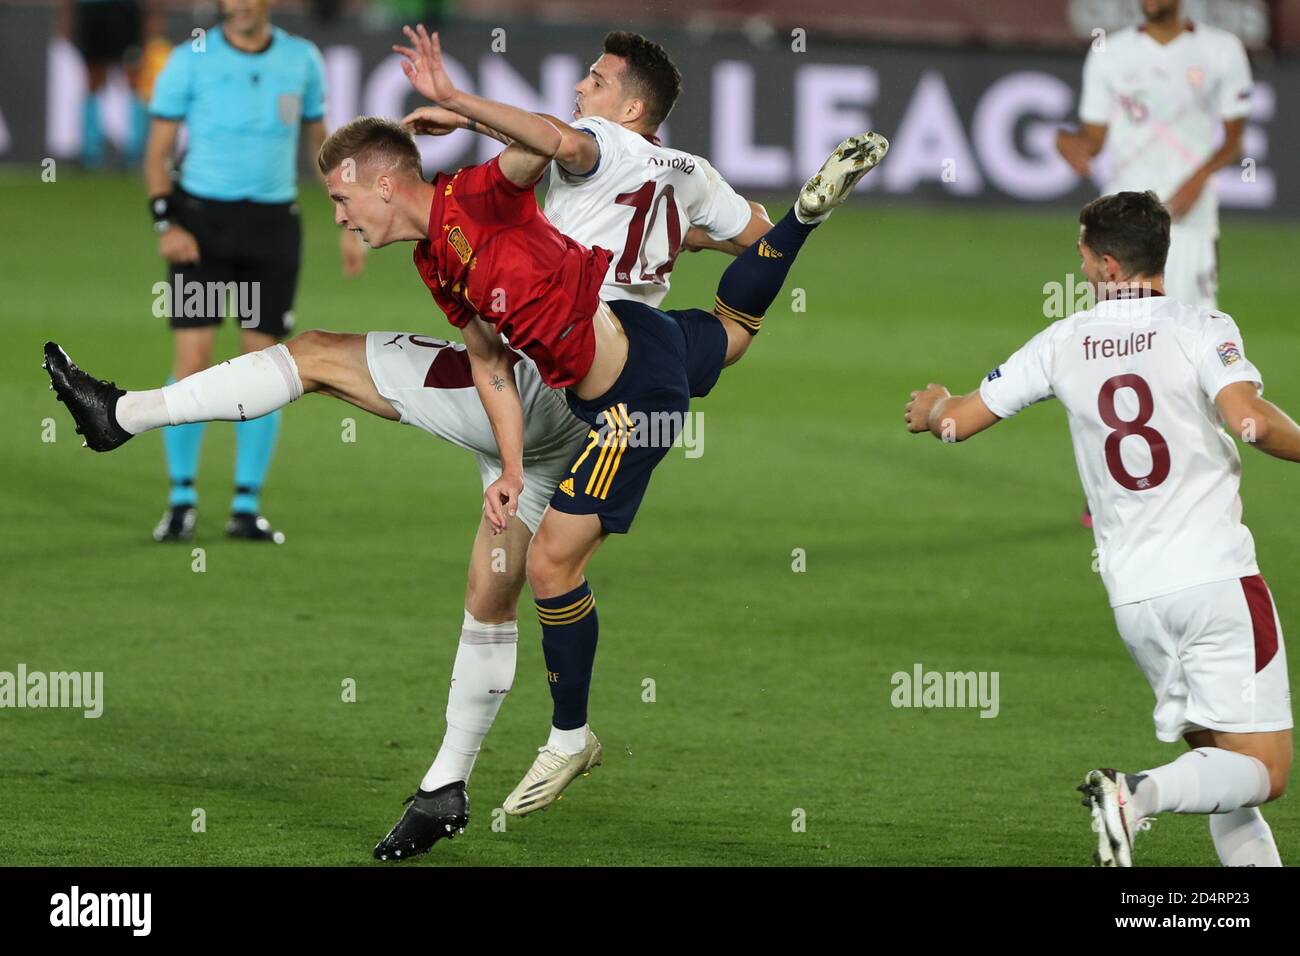 Madrid, Spain. 10th Oct, 2020. Spain's Dani Olmo (front) vies with Switzerland's Granit Xhaka during the UEFA Nations League football group match between Spain and Switzerland in Madrid, Spain, Oct. 10, 2020. Credit: Edward F. Peters/Xinhua/Alamy Live News Stock Photo